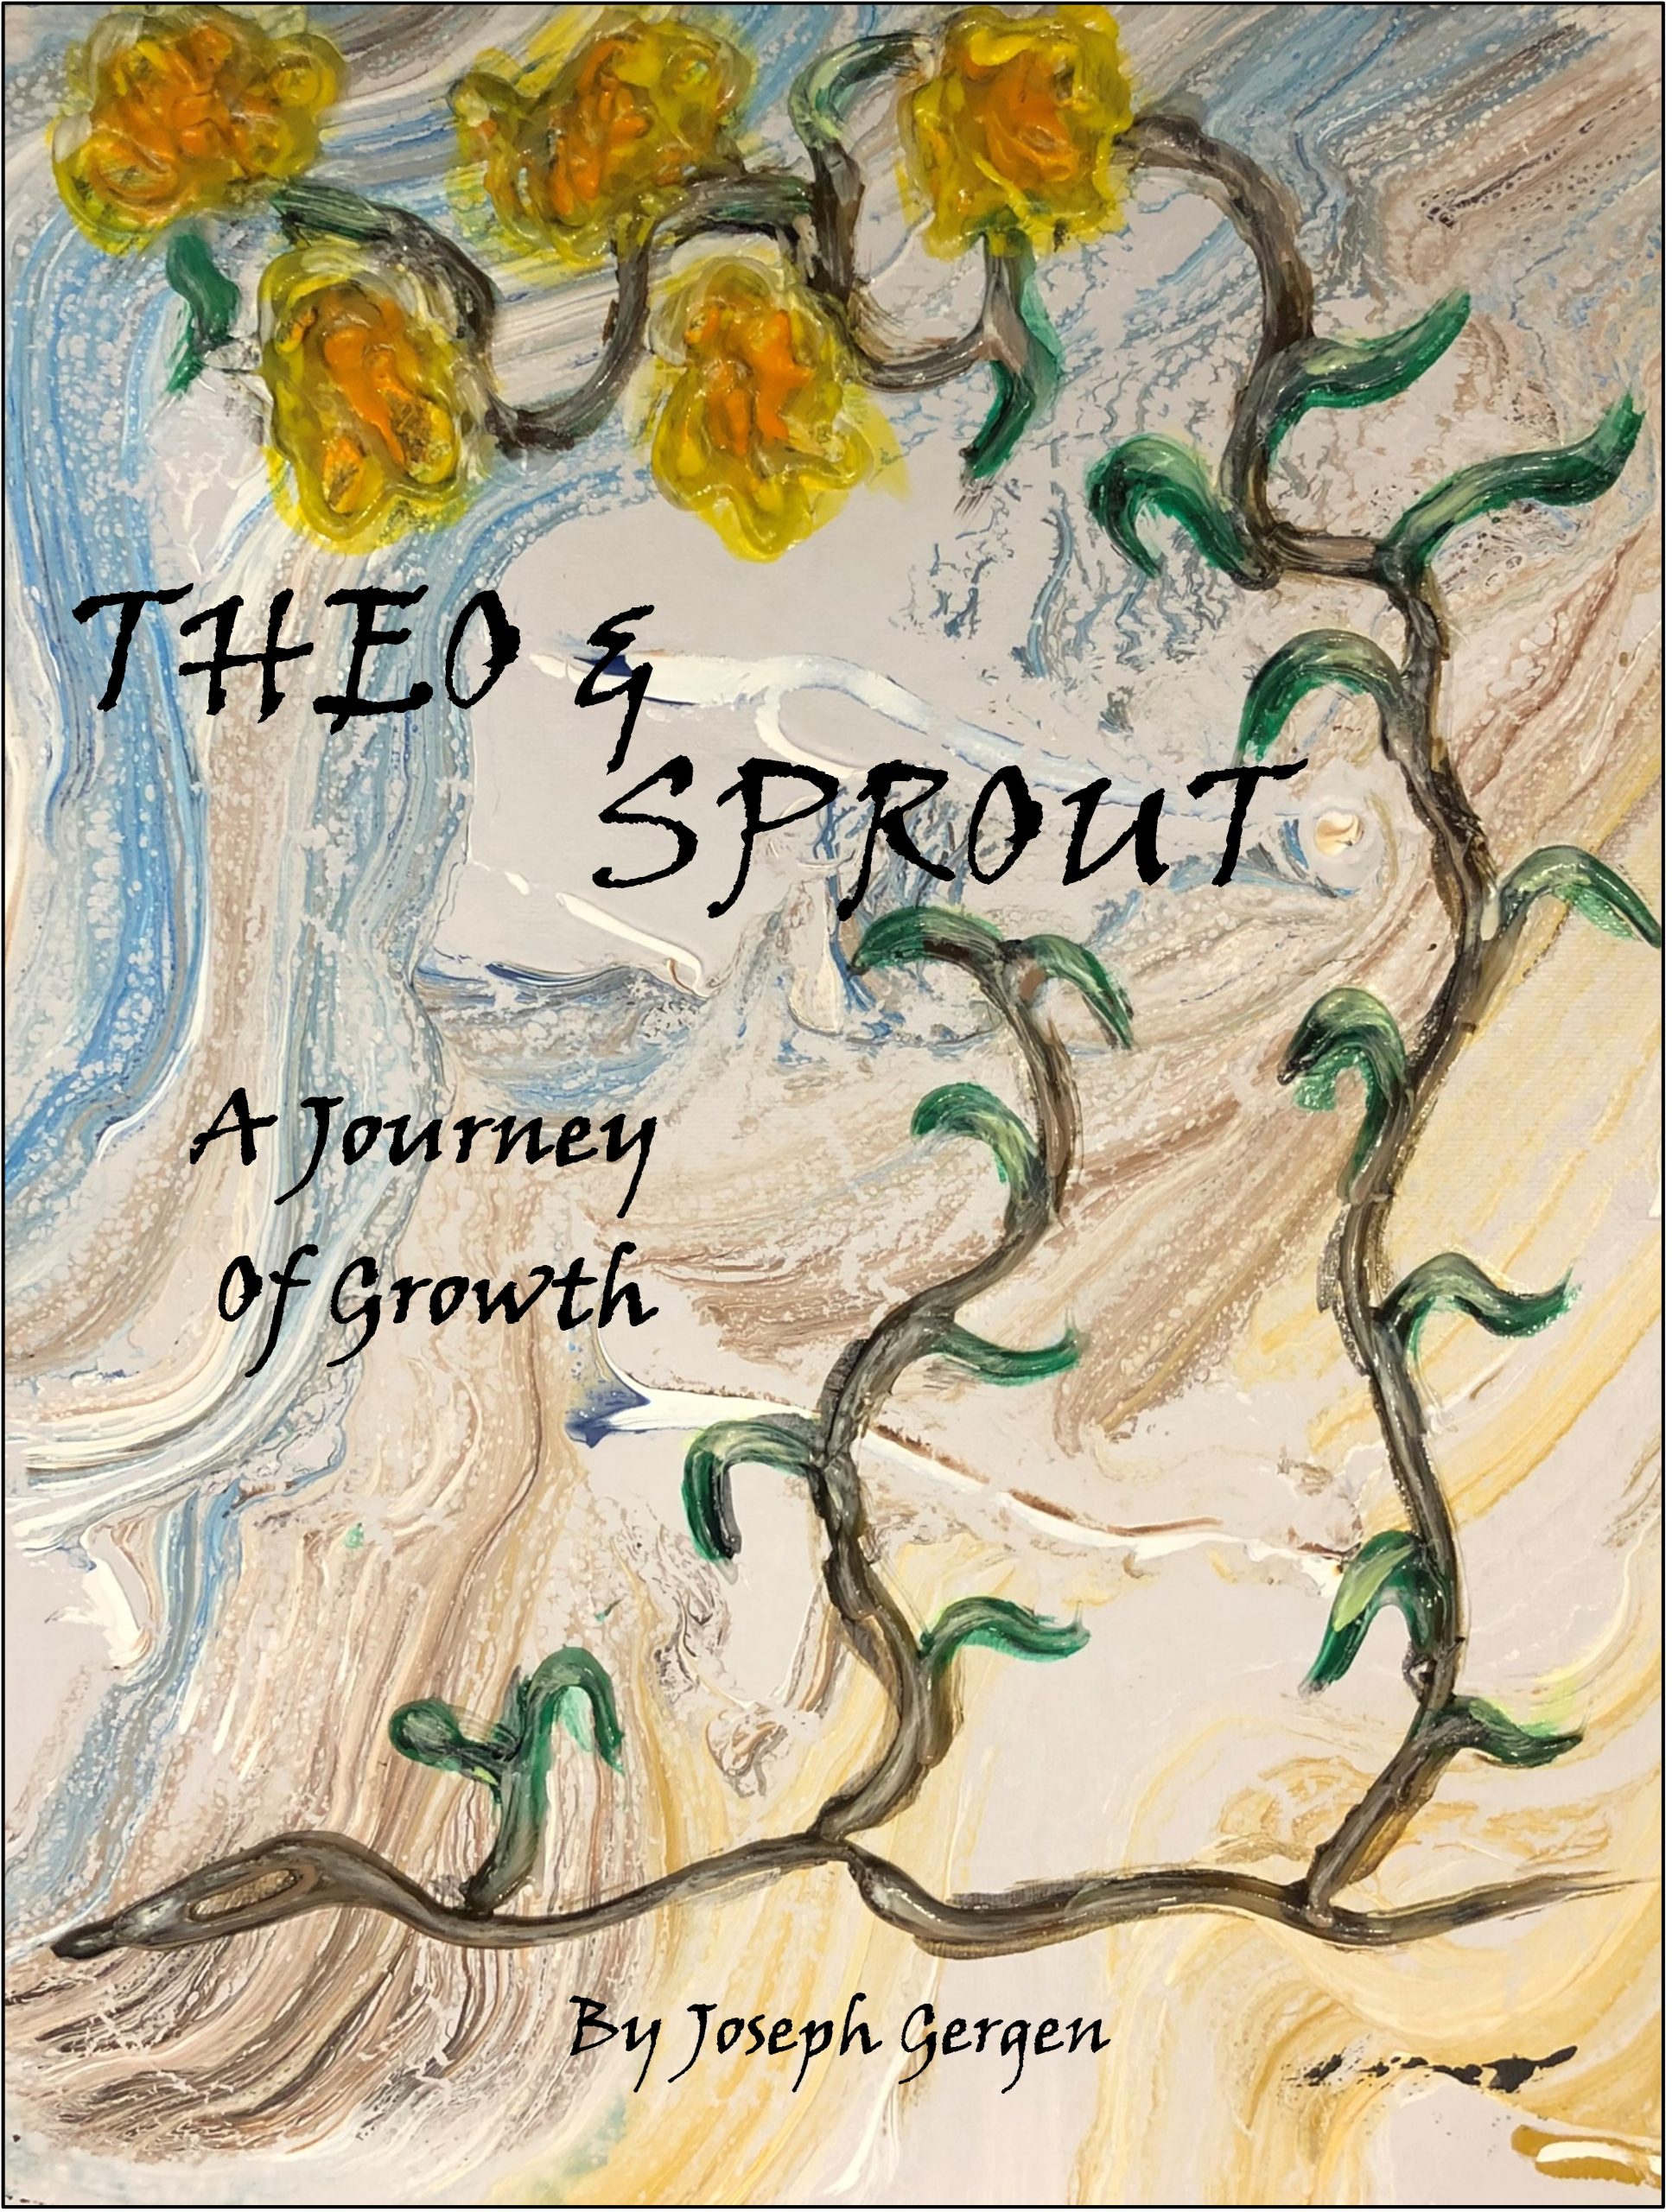 Spotlight on Theo and Sprout: A Journey of Growth (Joseph Gergen), Plus Giveaway! ~ US Only